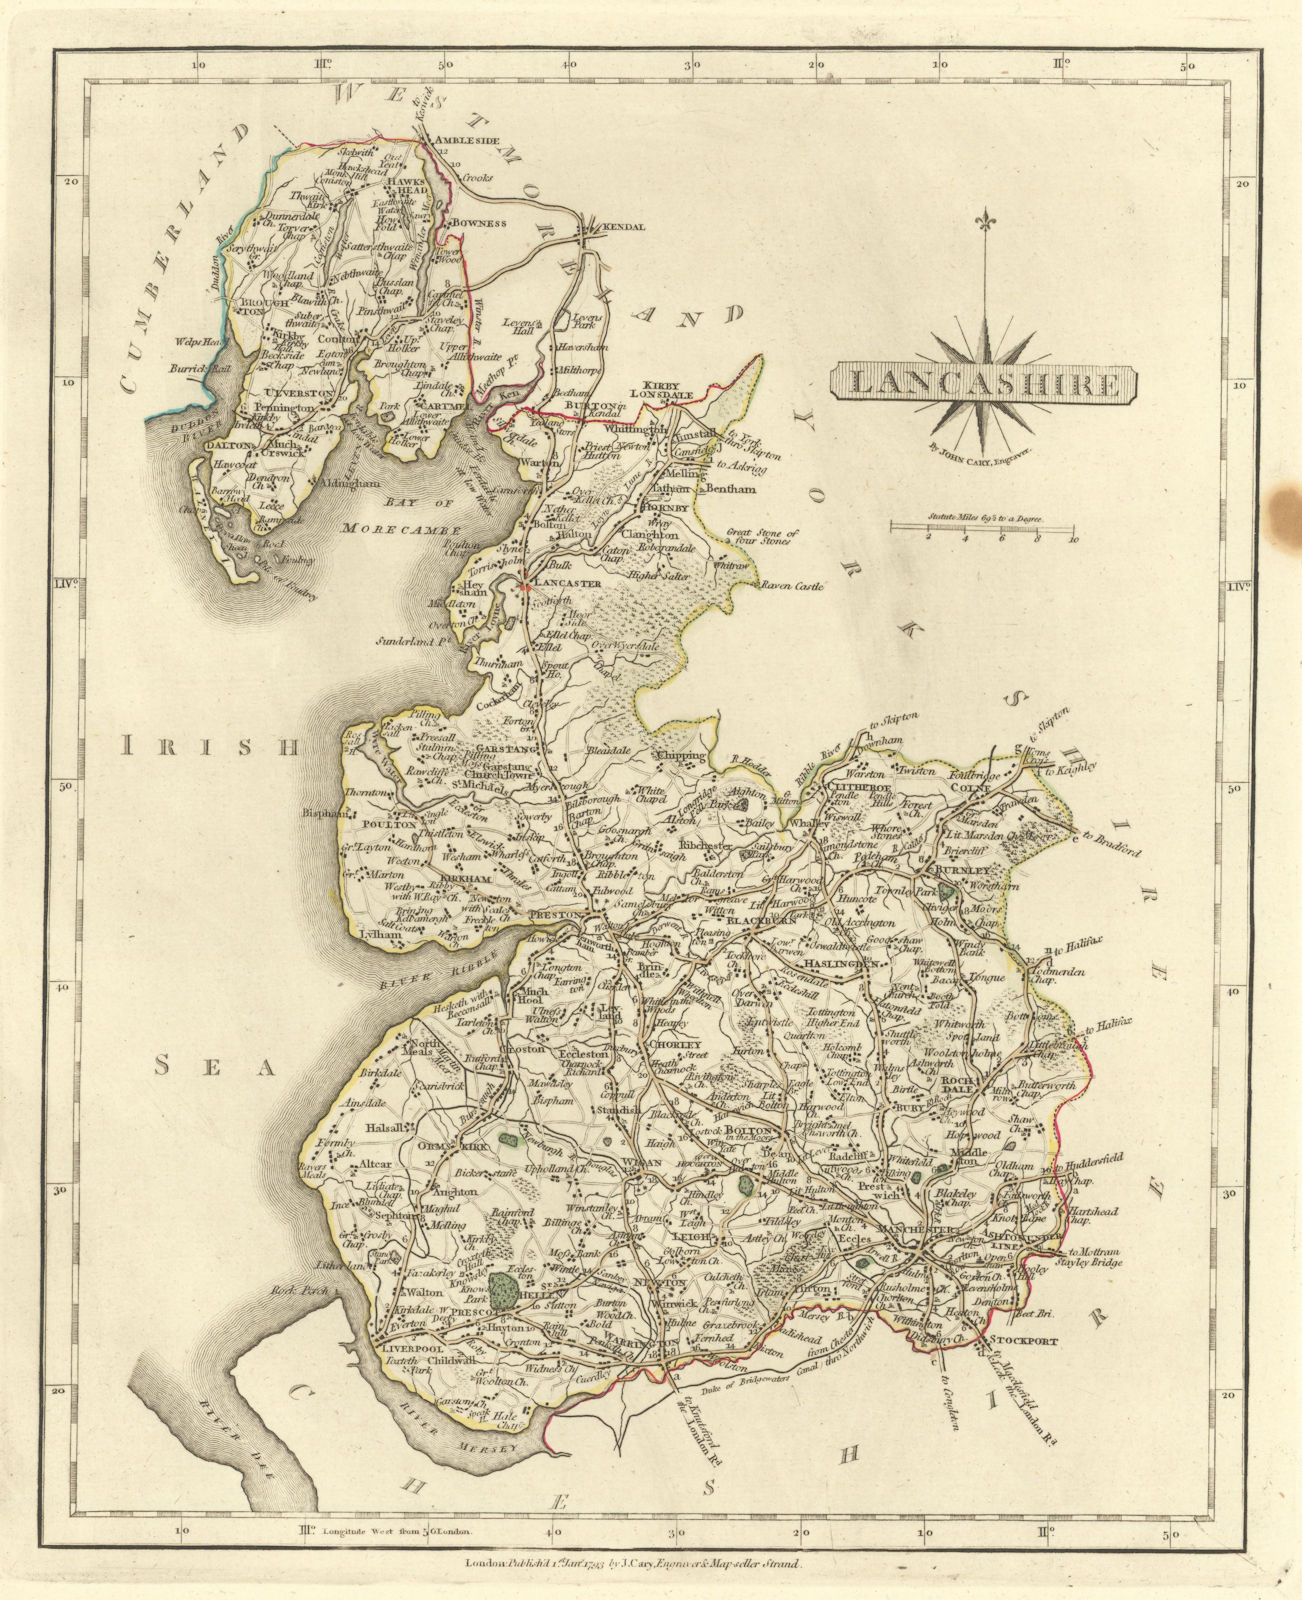 Associate Product Antique county map of STAFFORDSHIRE by JOHN CARY. Original outline colour 1793